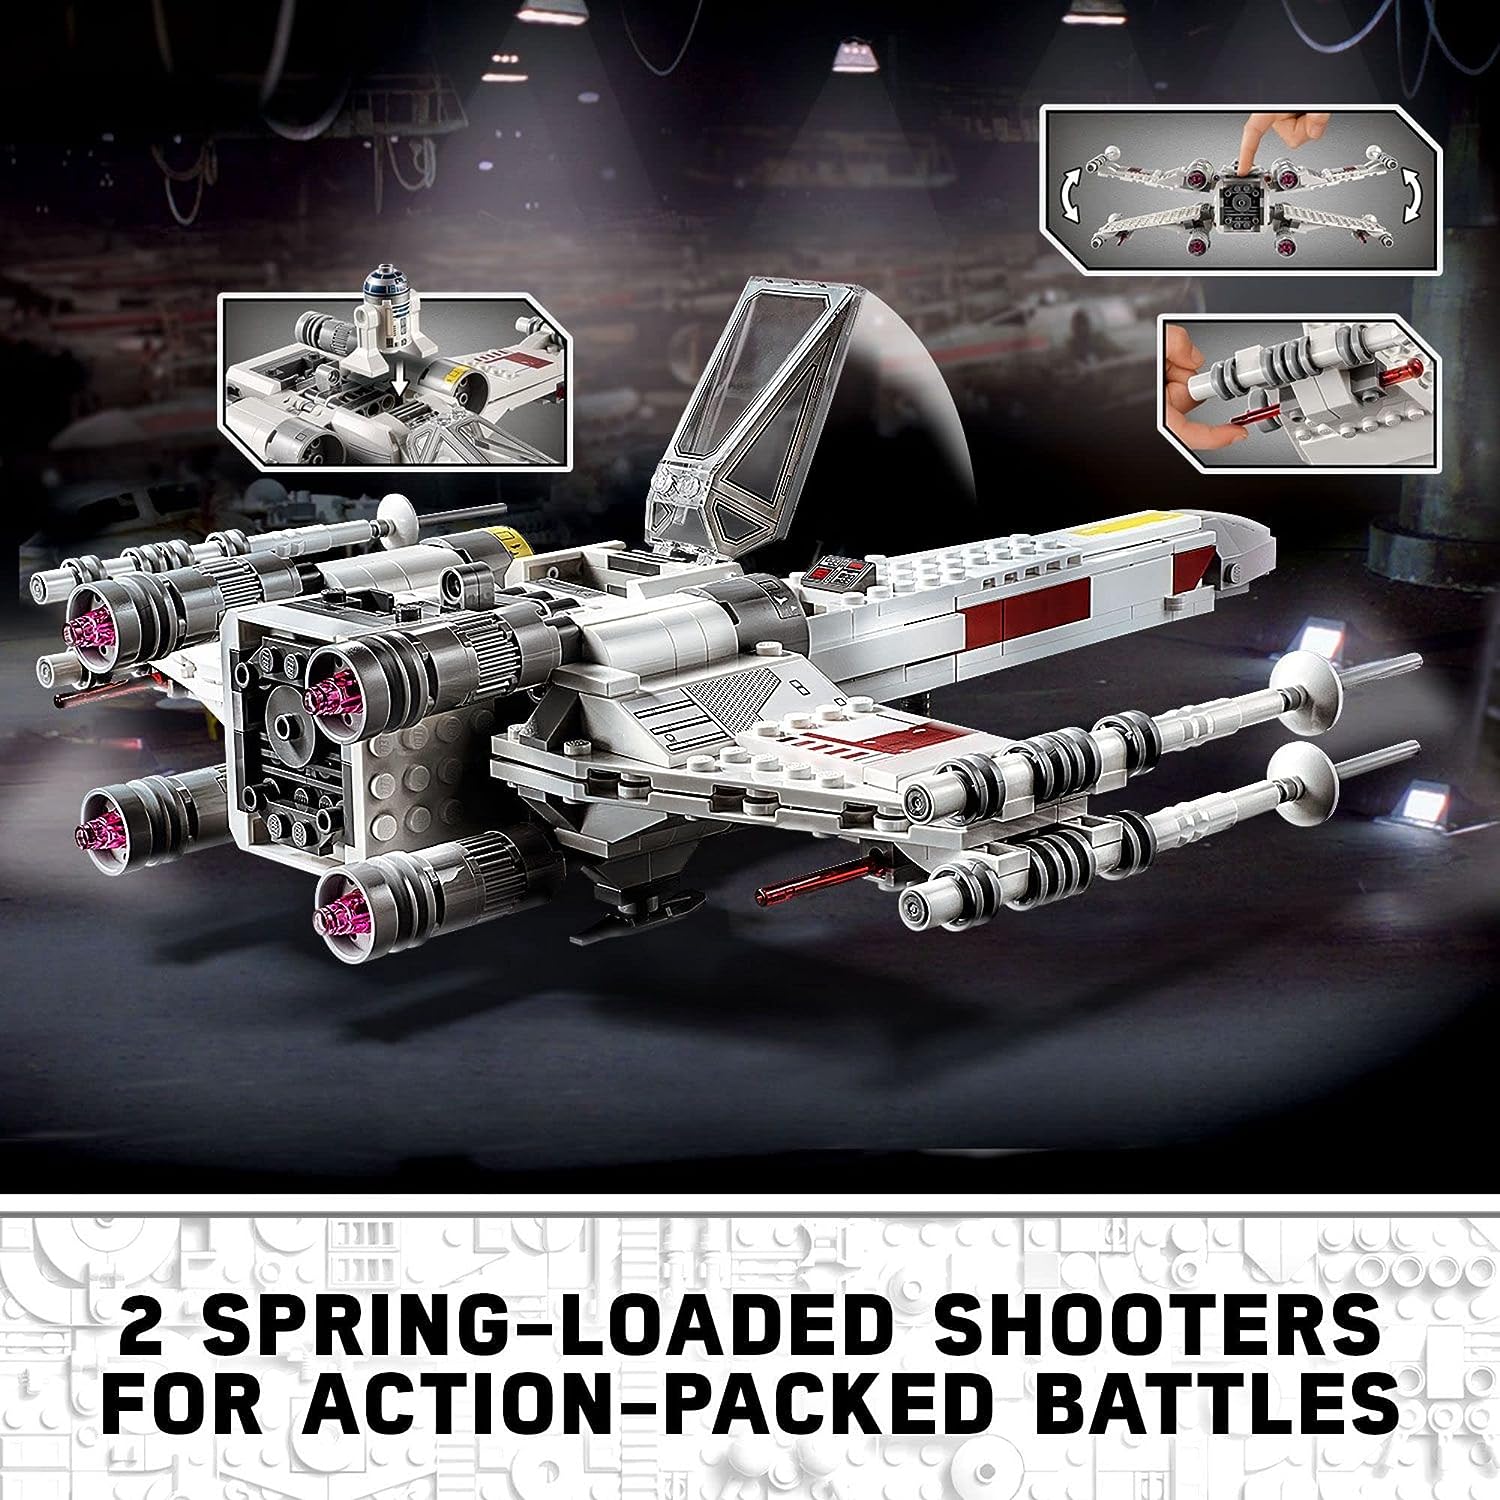 LEGO Star Wars Luke Skywalker's X-Wing Fighter 75301 Building Toy, Gifts for Kids, Boys & Girls with Princess Leia Minifigure and R2-D2 Droid Figure - image 4 of 7